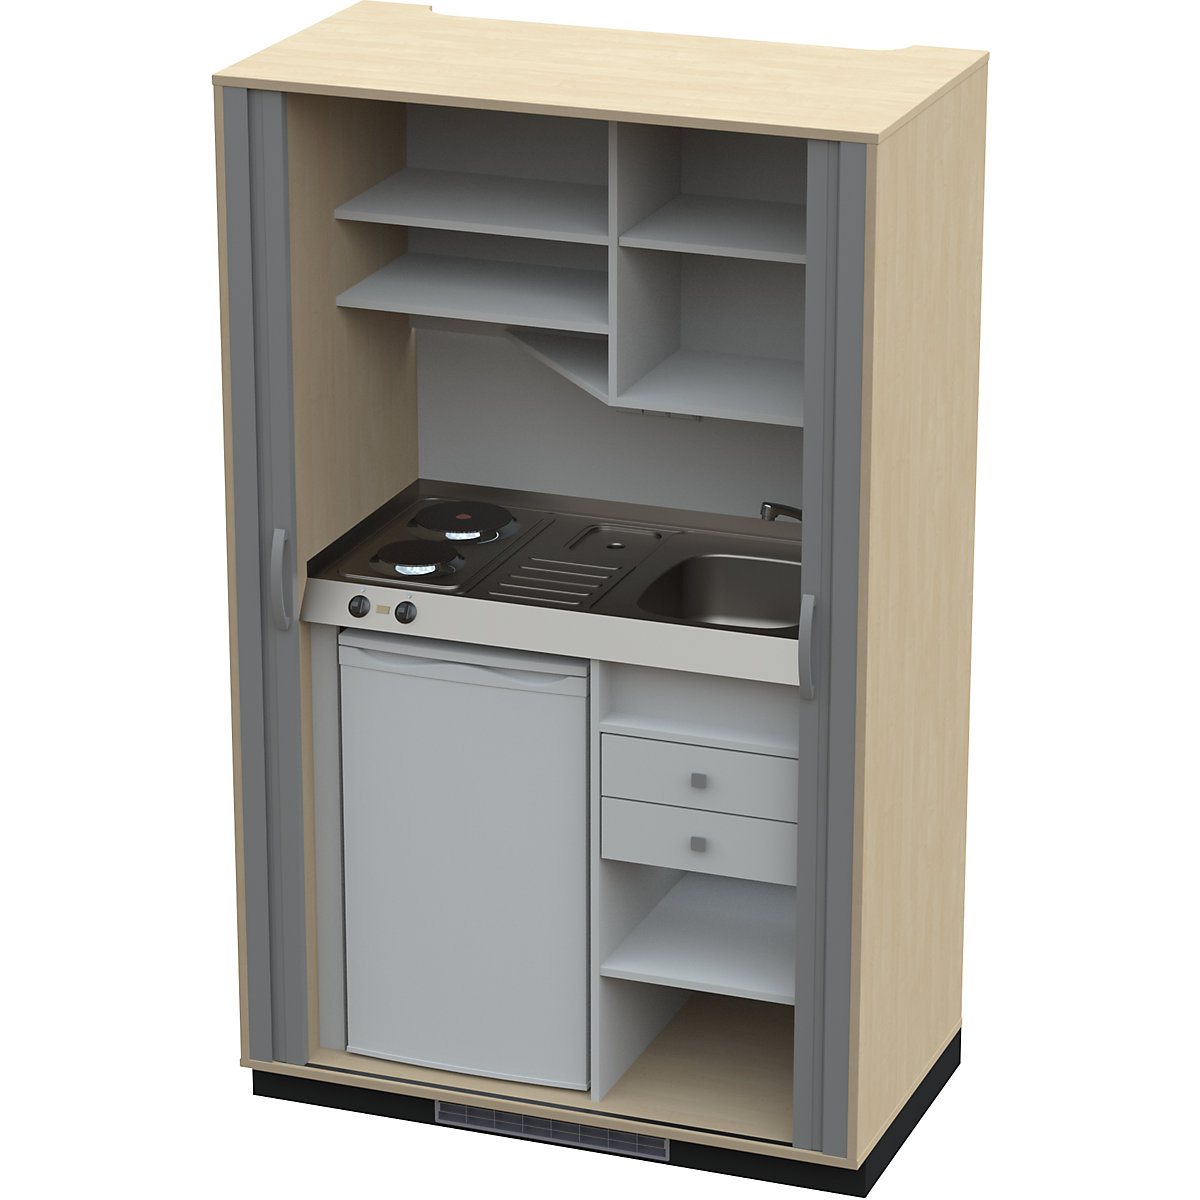 Kitchen unit with roller blind, 2 hotplates, basin at right, birch/charcoal 1956 x 1200 x 650 mm-4